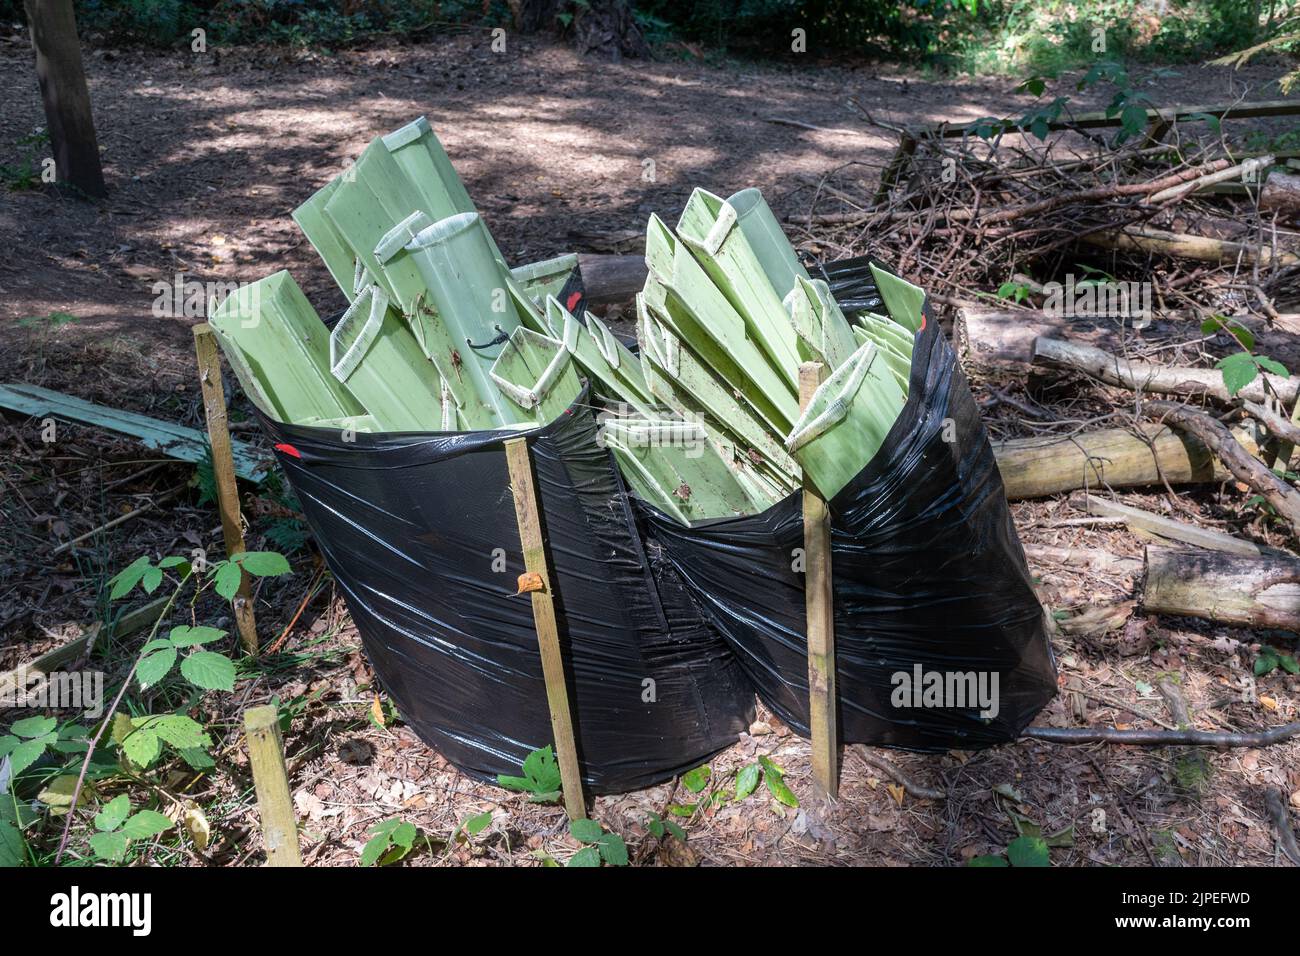 Green plastic sleeves from a tree-planting project collected up afterwards in black sacks for disposal, UK Stock Photo